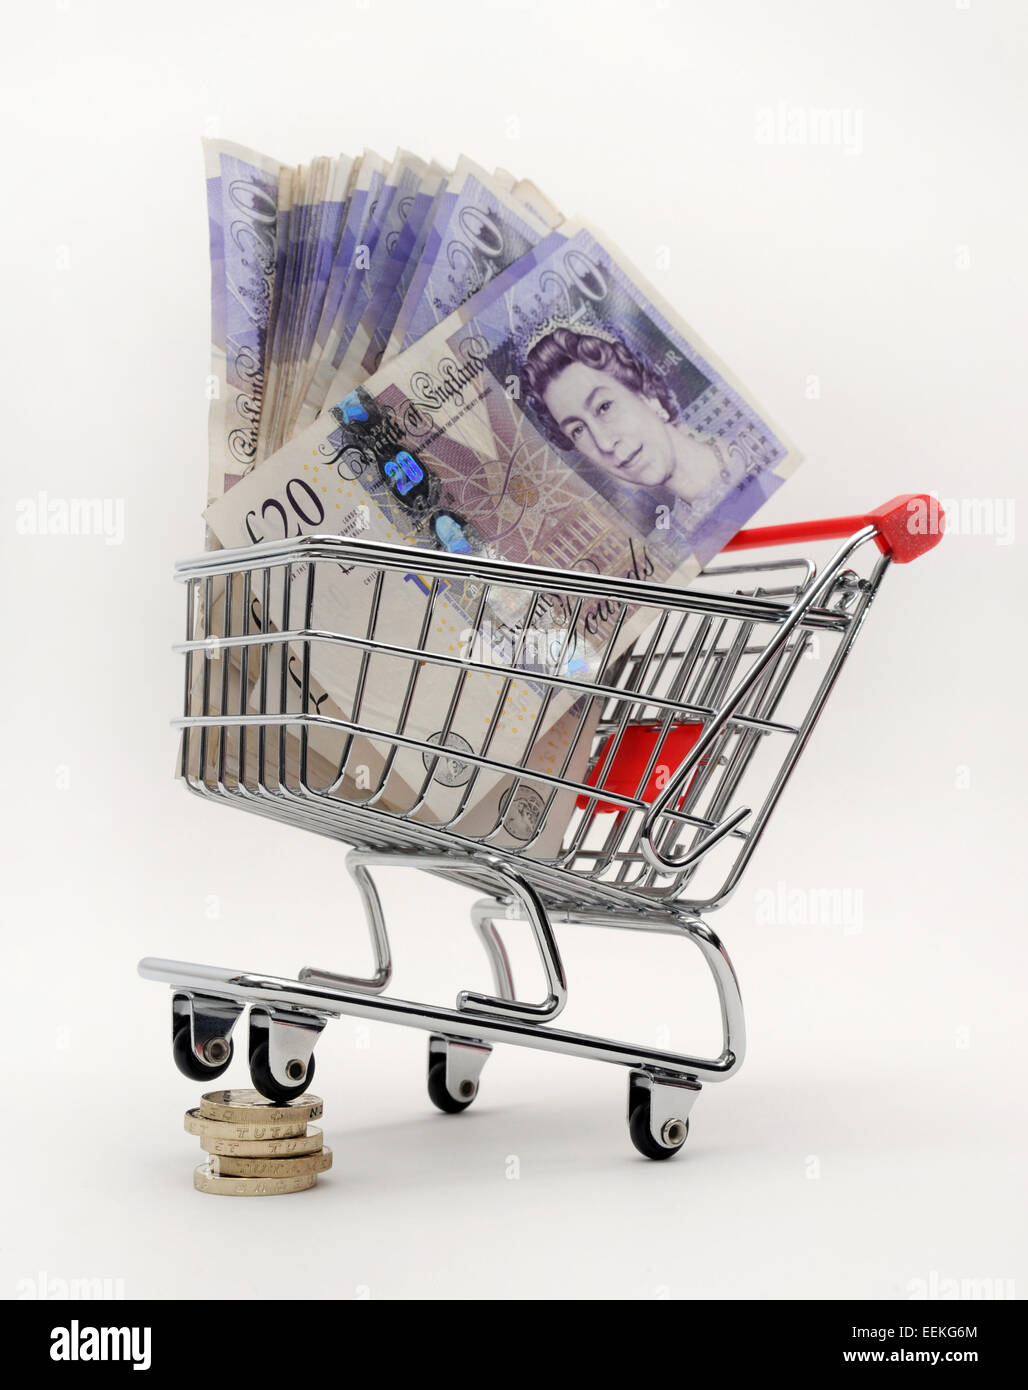 SUPERMARKET TROLLEY WITH £20 NOTES RE SUPERMARKETS FOOD PRICES COSTS HOUSEHOLD BUDGETS PENSION PROVIDER COMPANY SAVINGS CASH UK Stock Photo